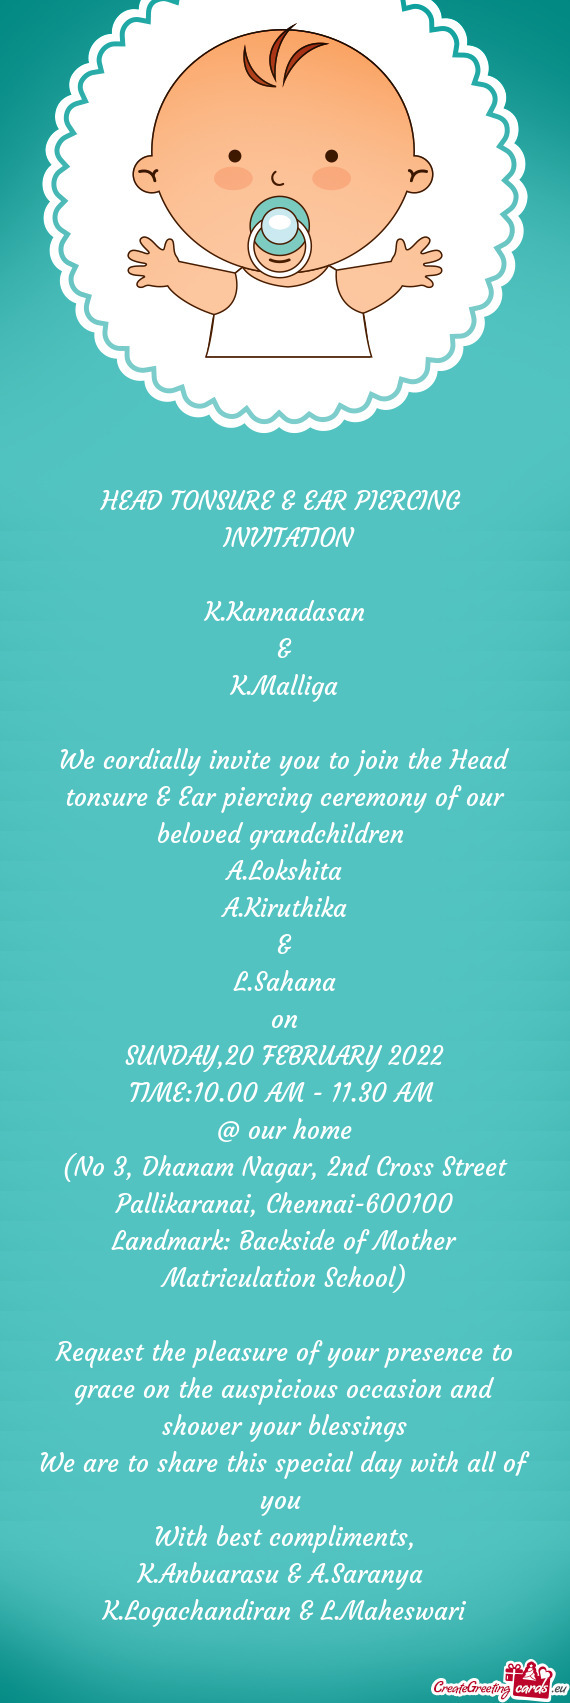 We cordially invite you to join the Head tonsure & Ear piercing ceremony of our beloved grandchildre